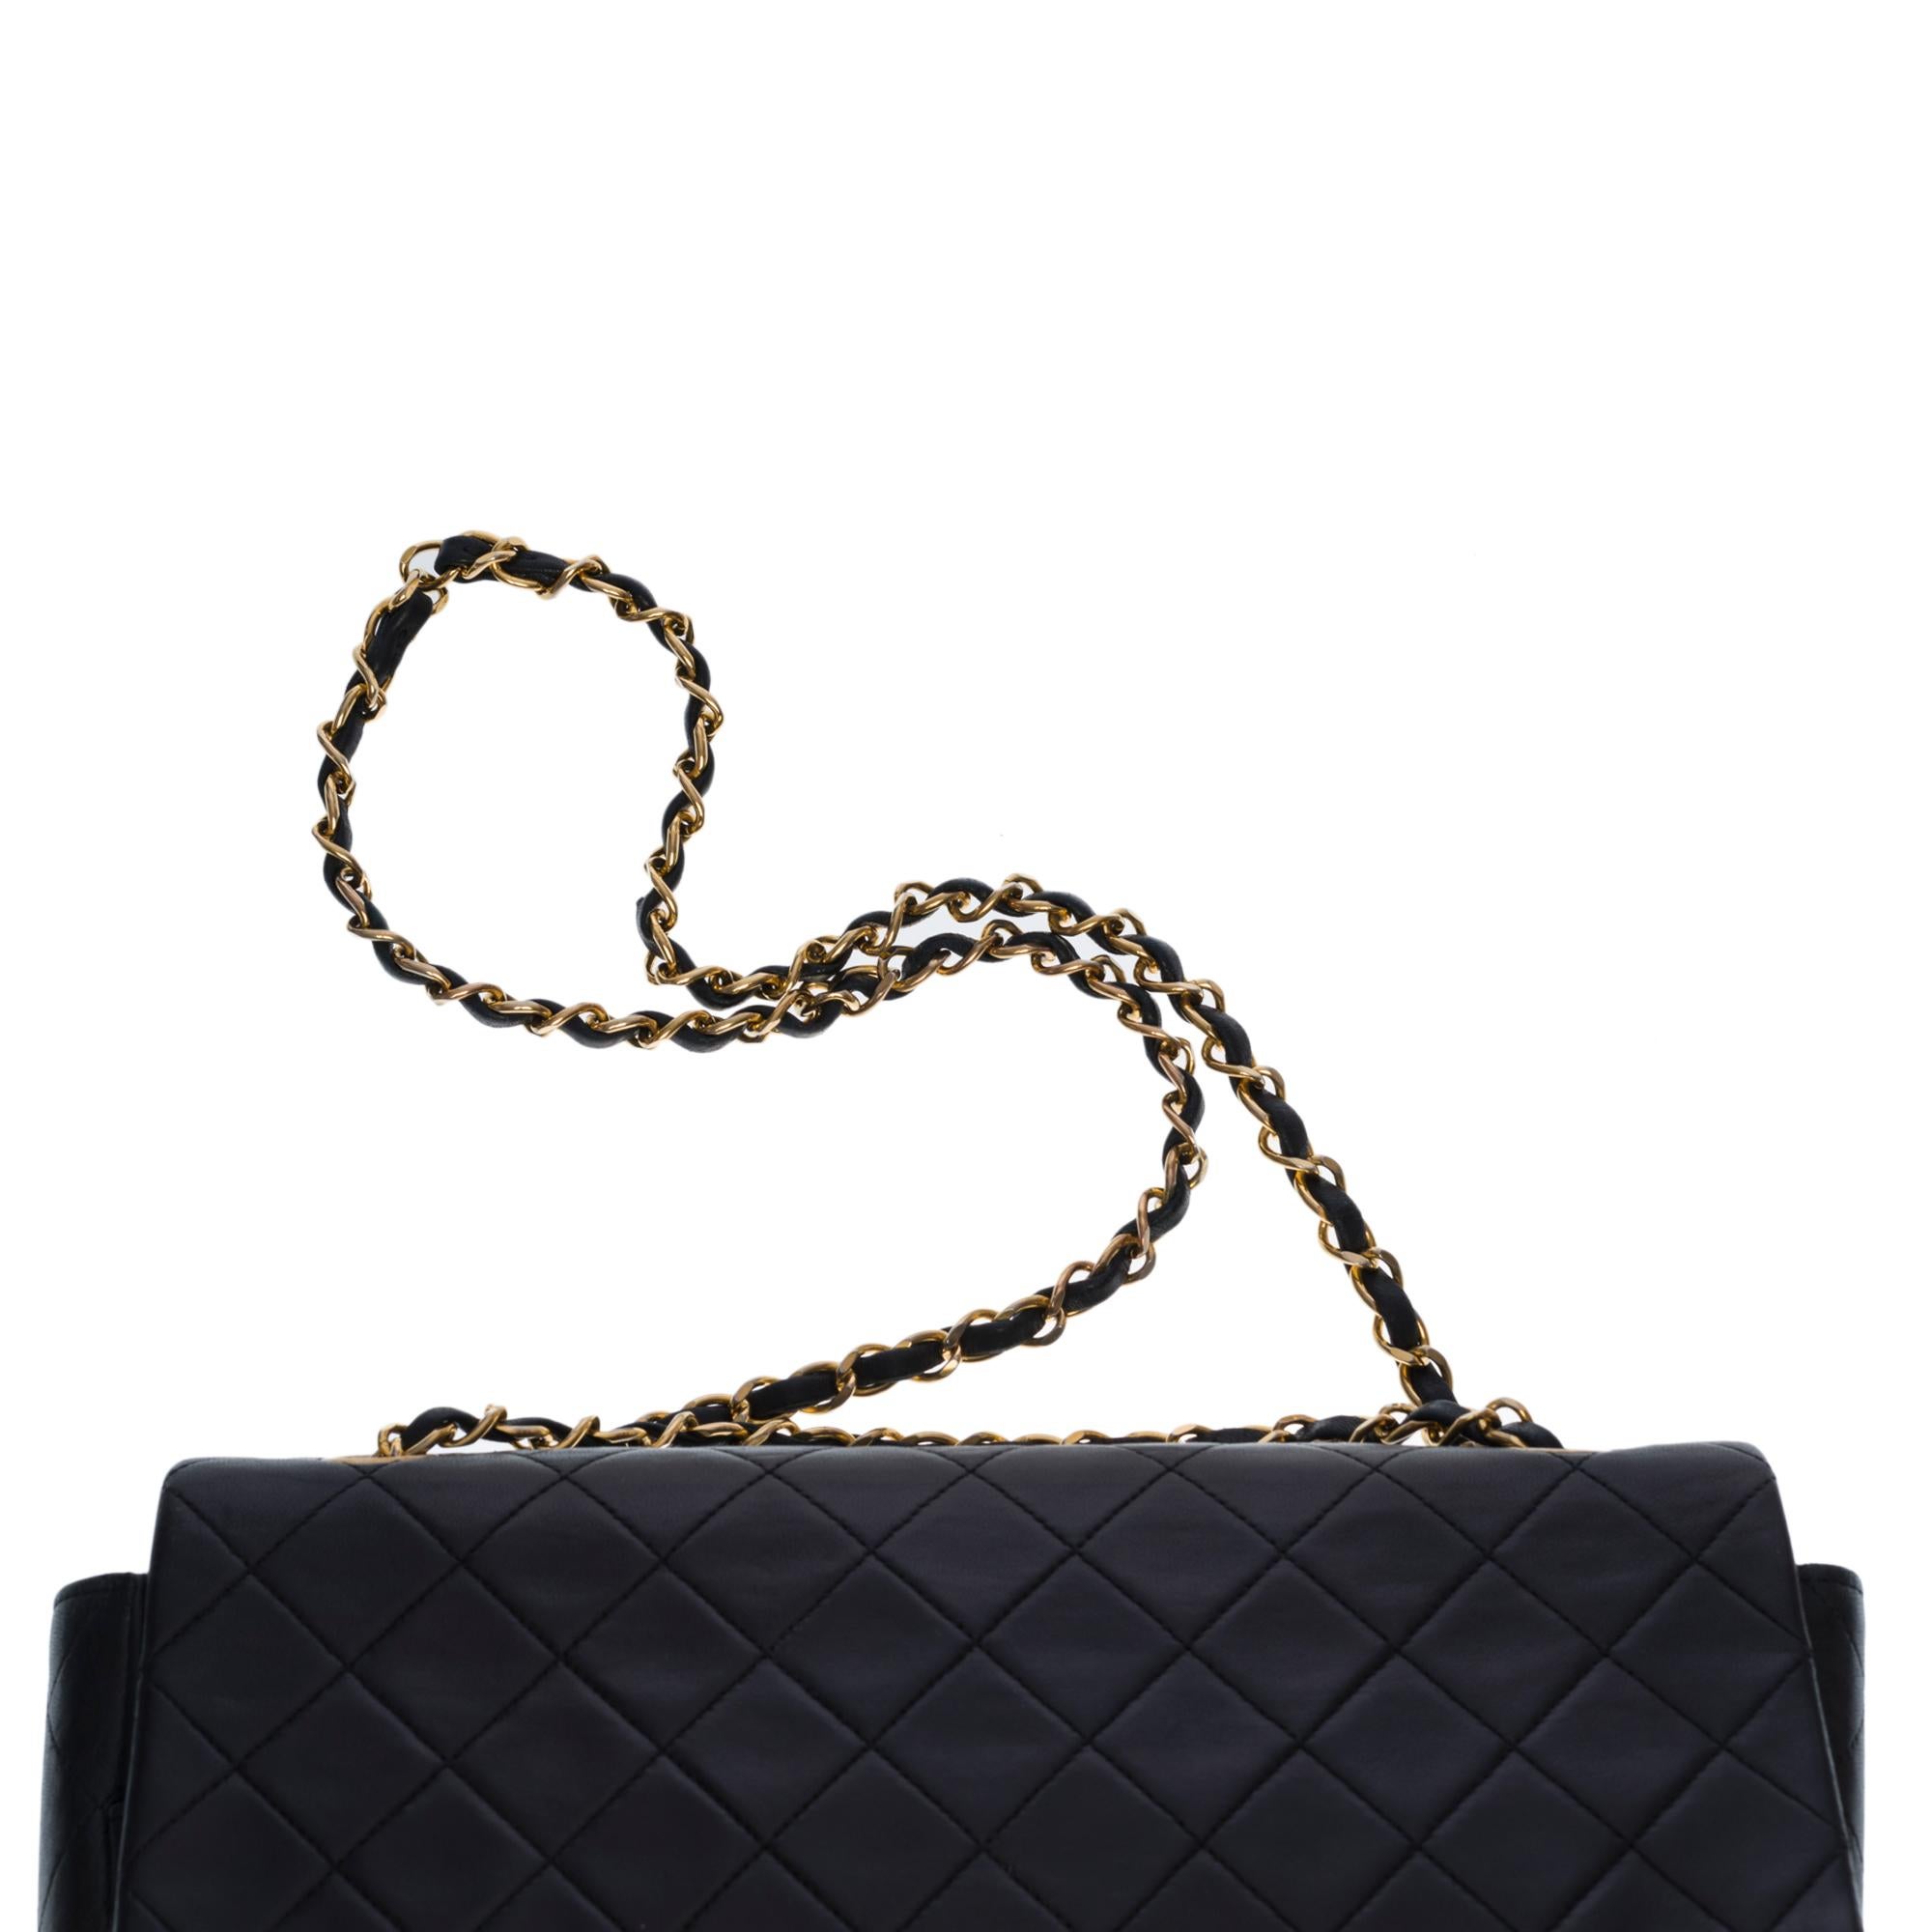 Chanel Timeless/Classic Flap shoulder bag in black quilted lambskin, GHW 3